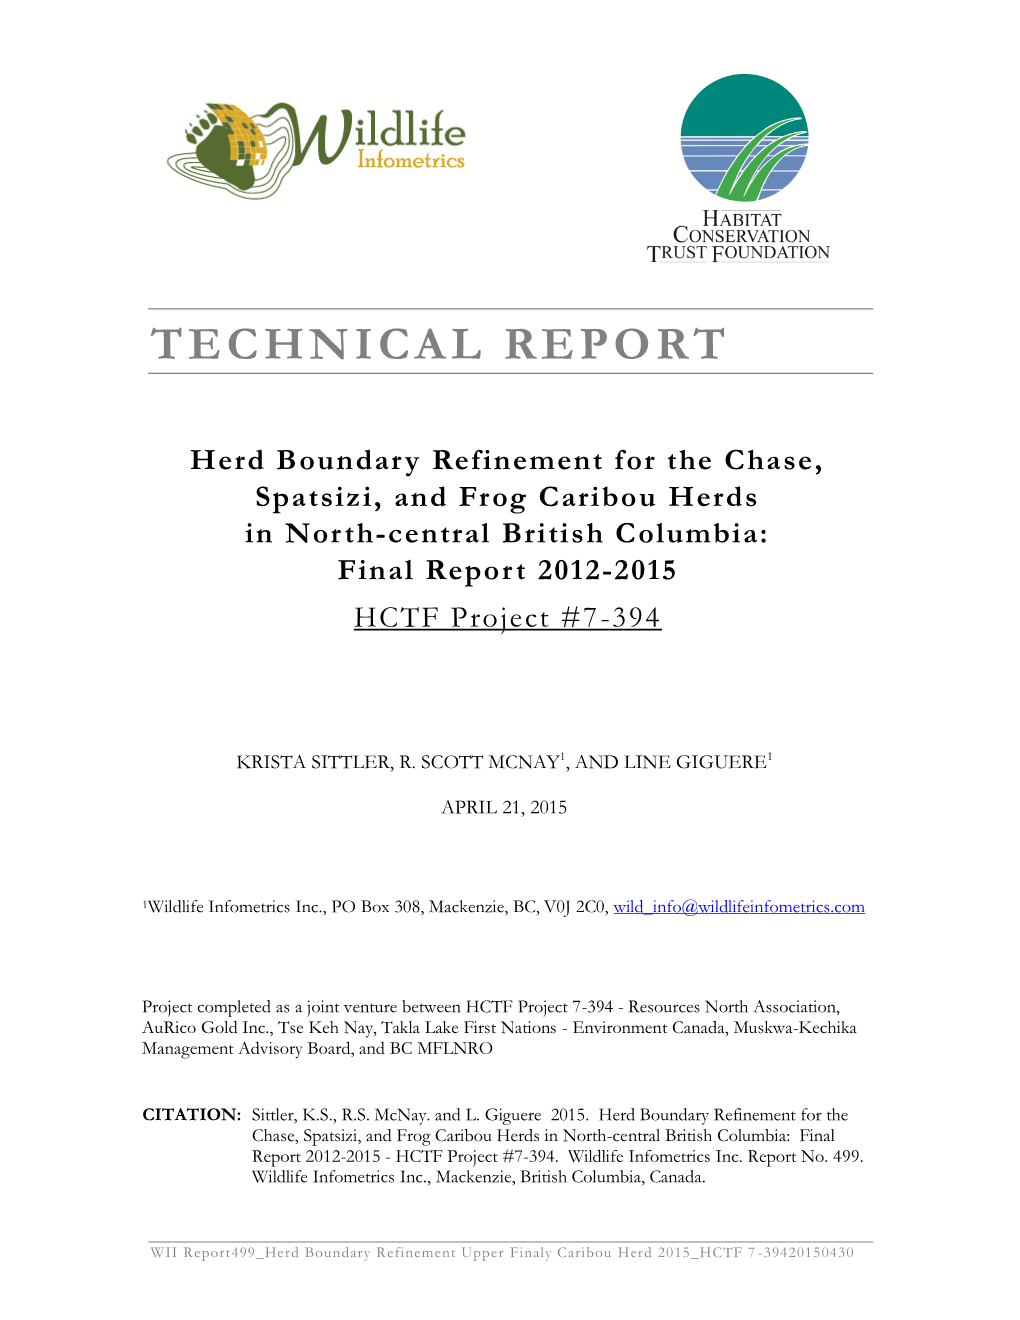 Final Report 2012-2015 HCTF Project #7-394